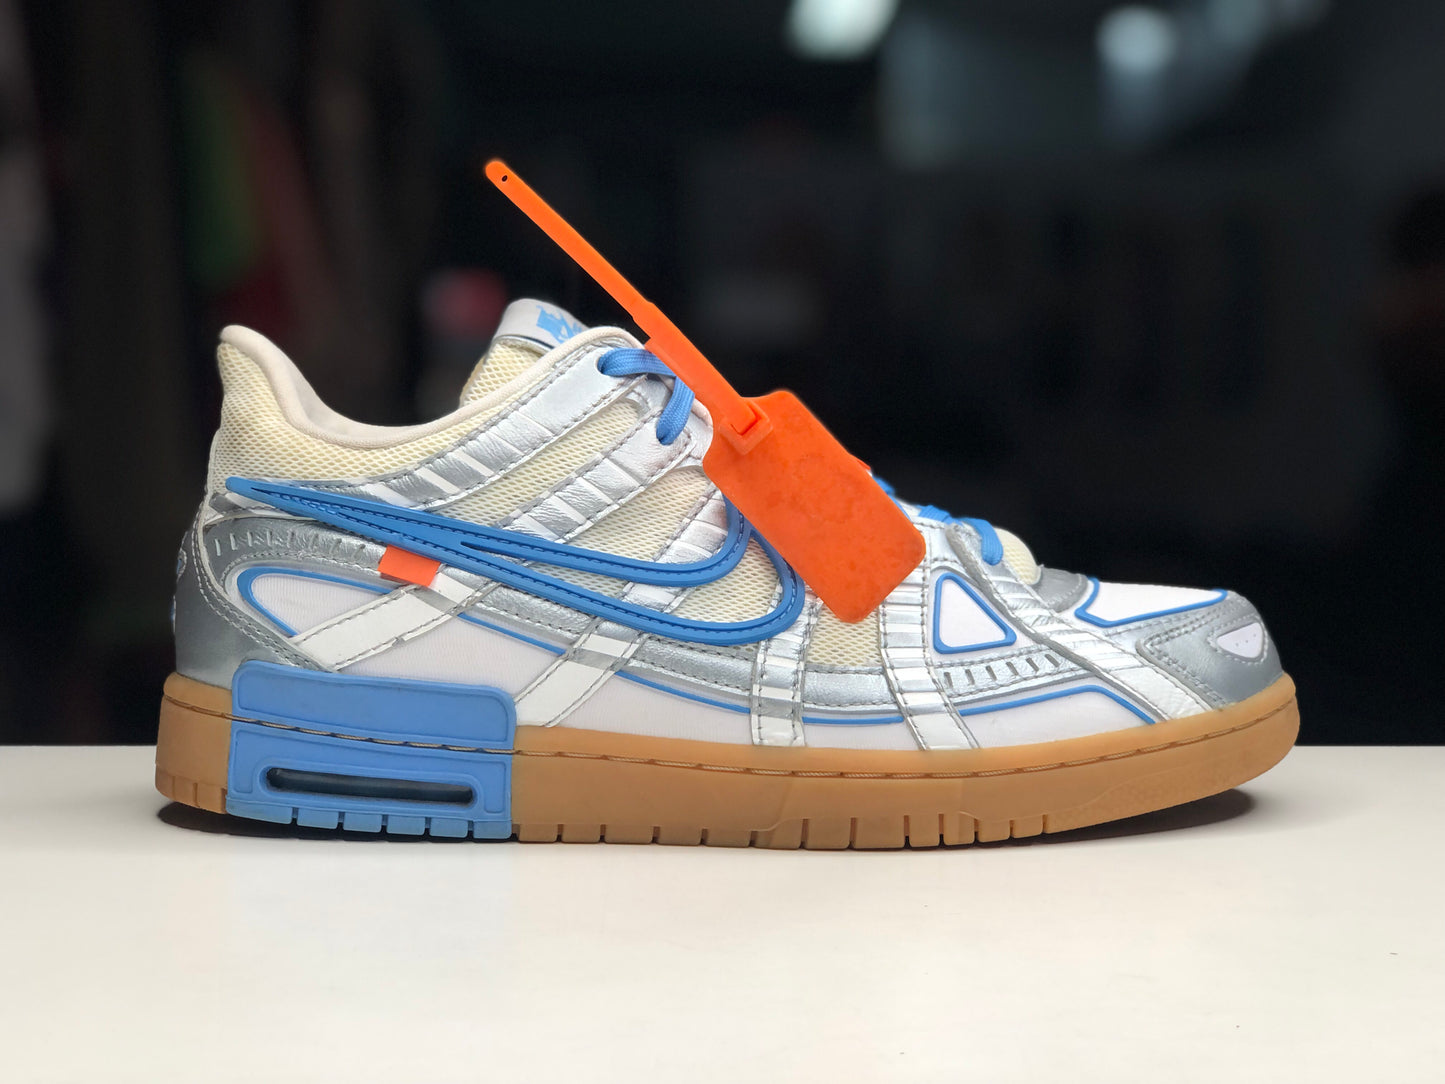 Nike Air Rubber Dunk Off-White UNC Size 11